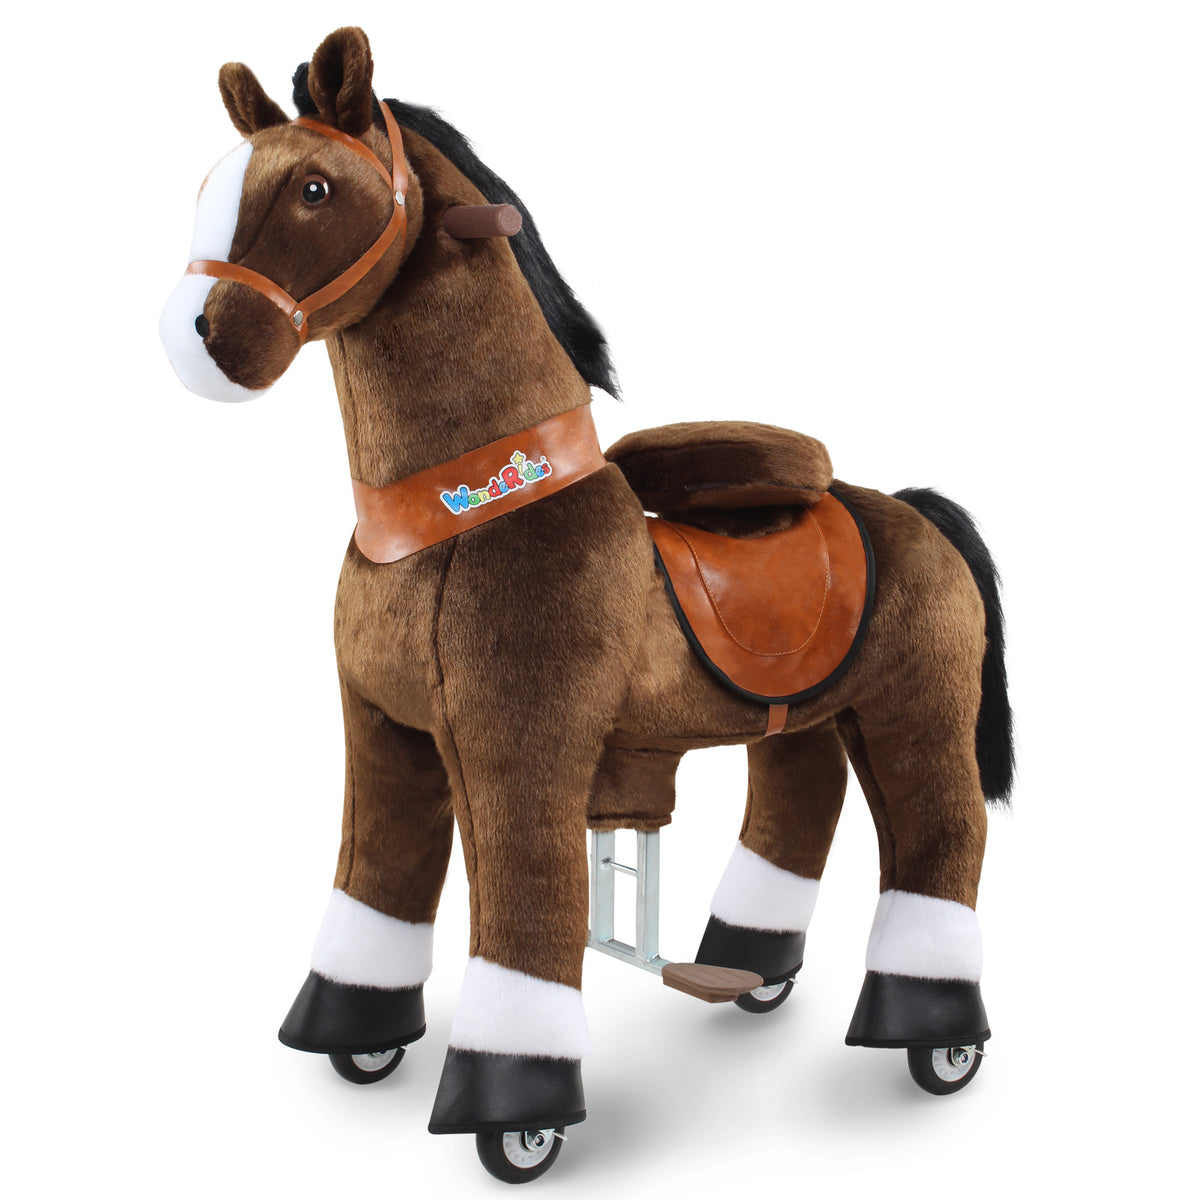 WondeRides Ride-on Toy Age 4-8 Chocolate Horse [Limited Edition]